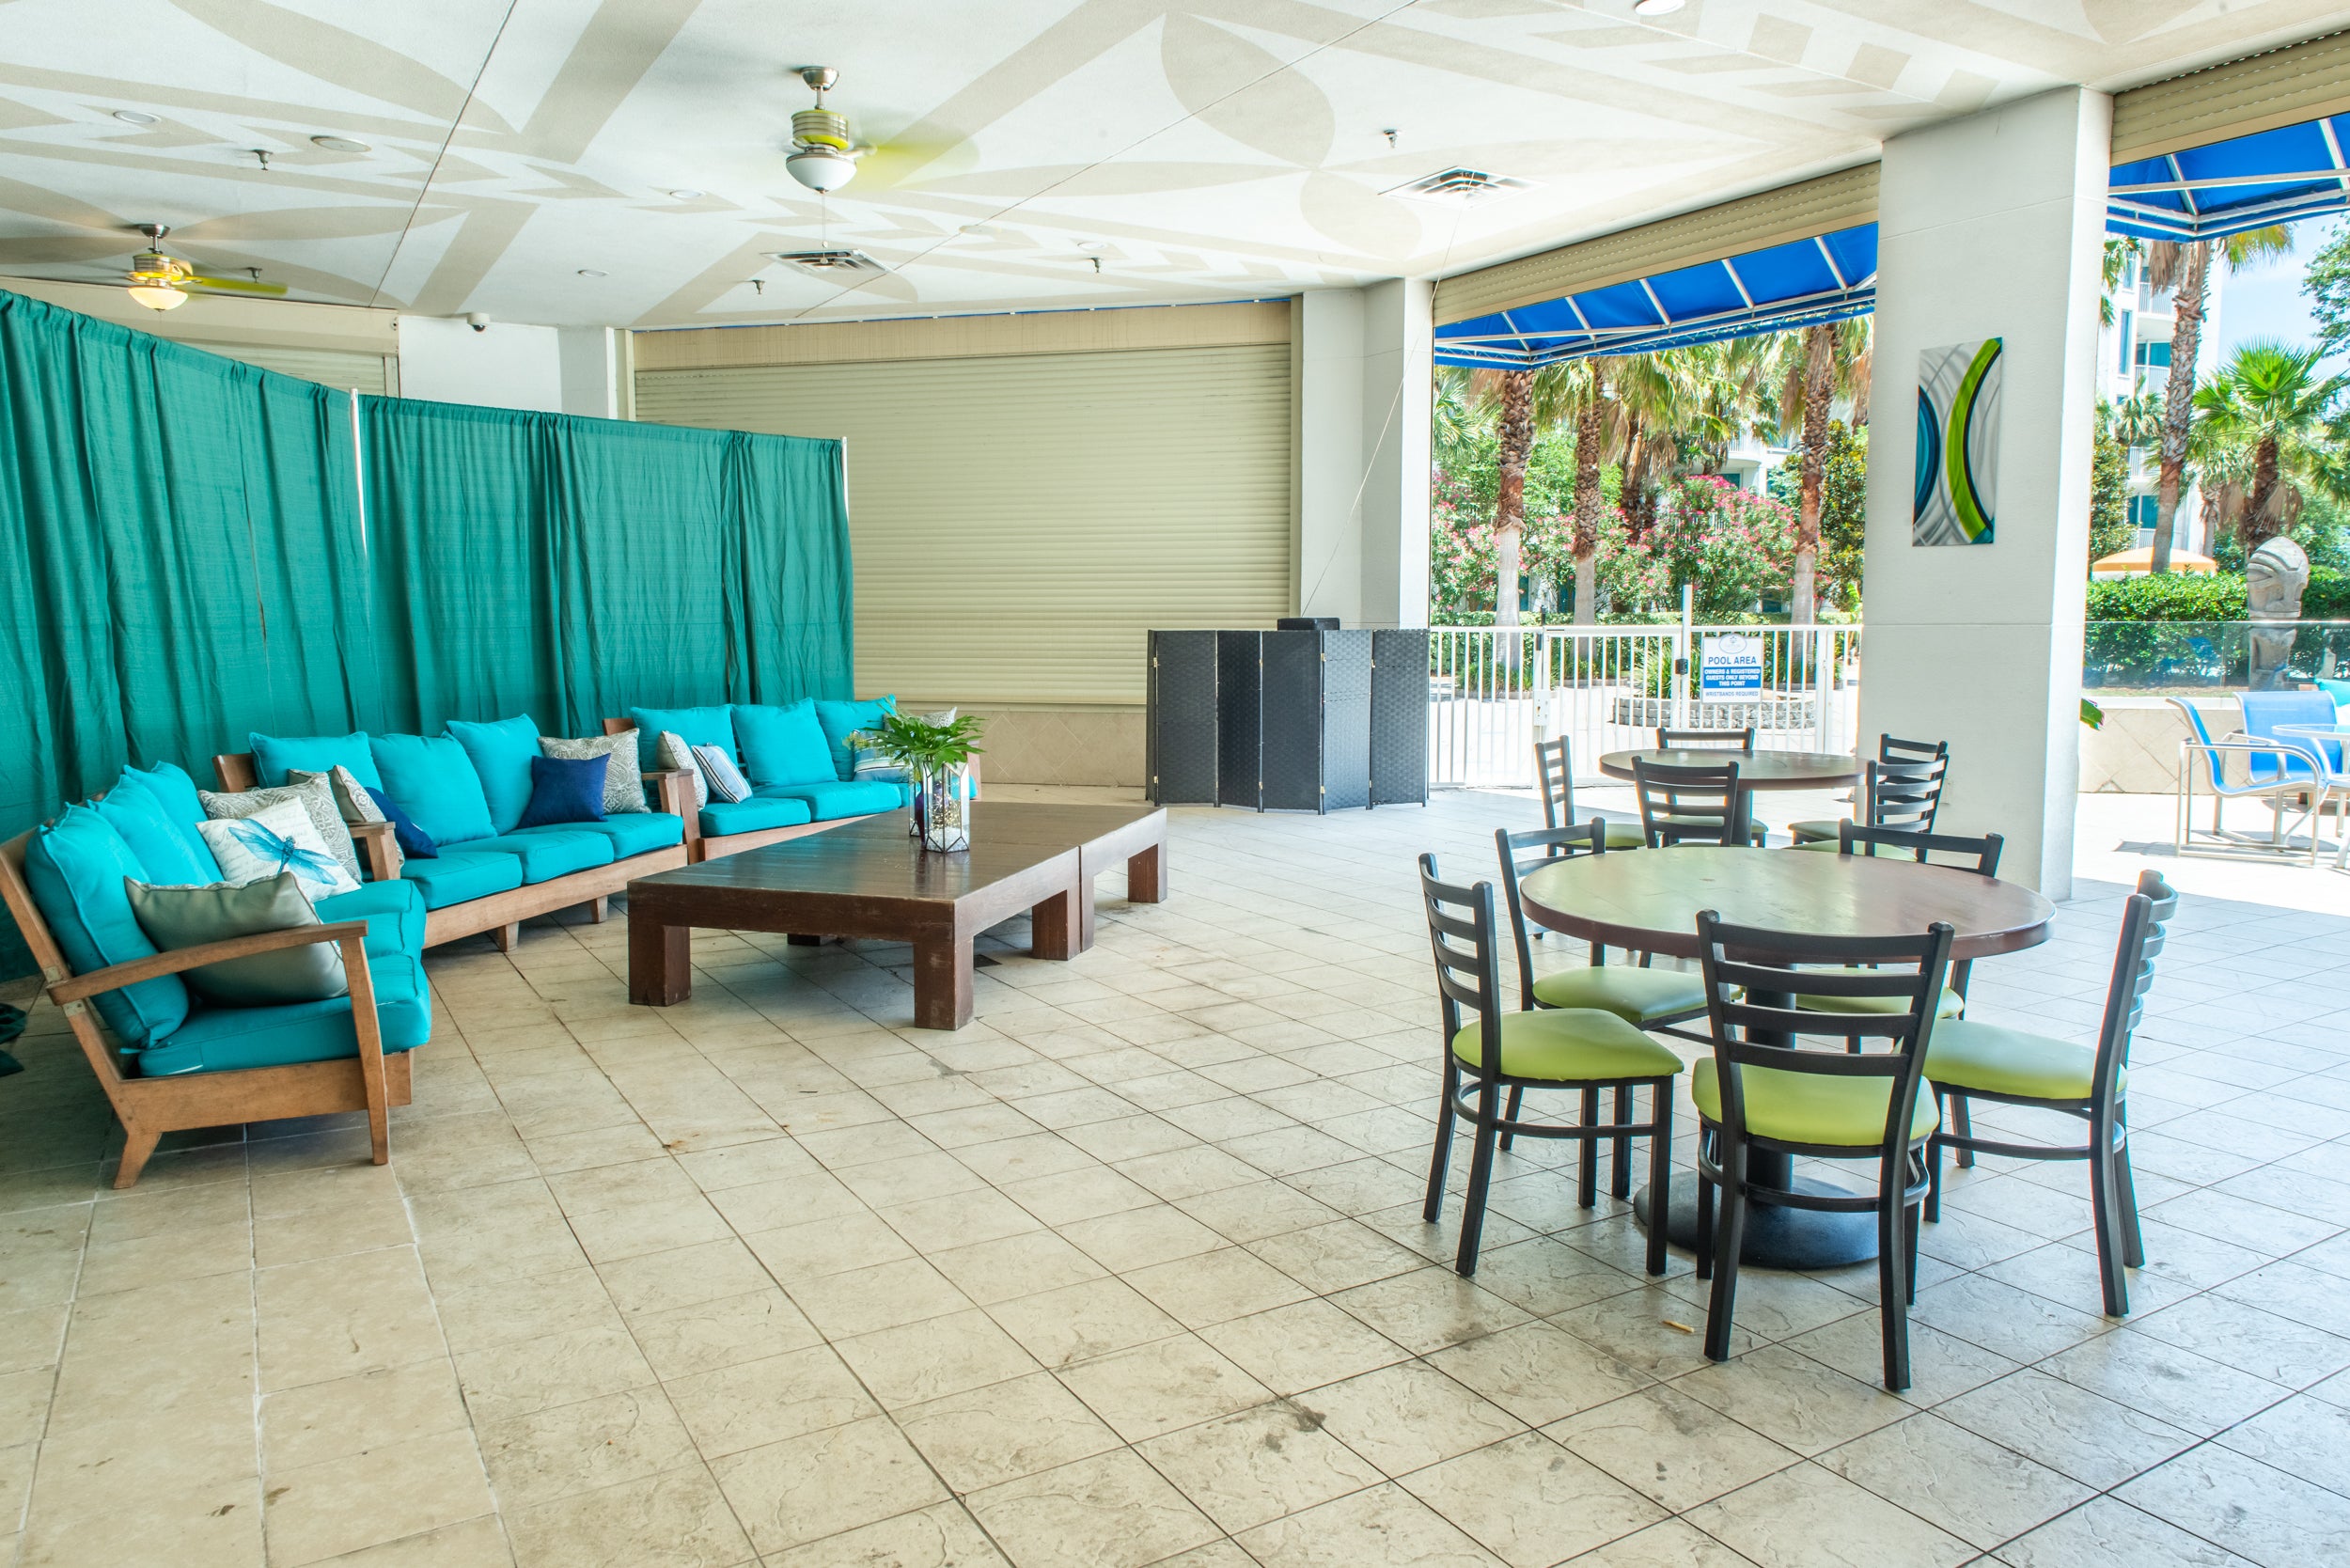 Updated Poolside Bar Area